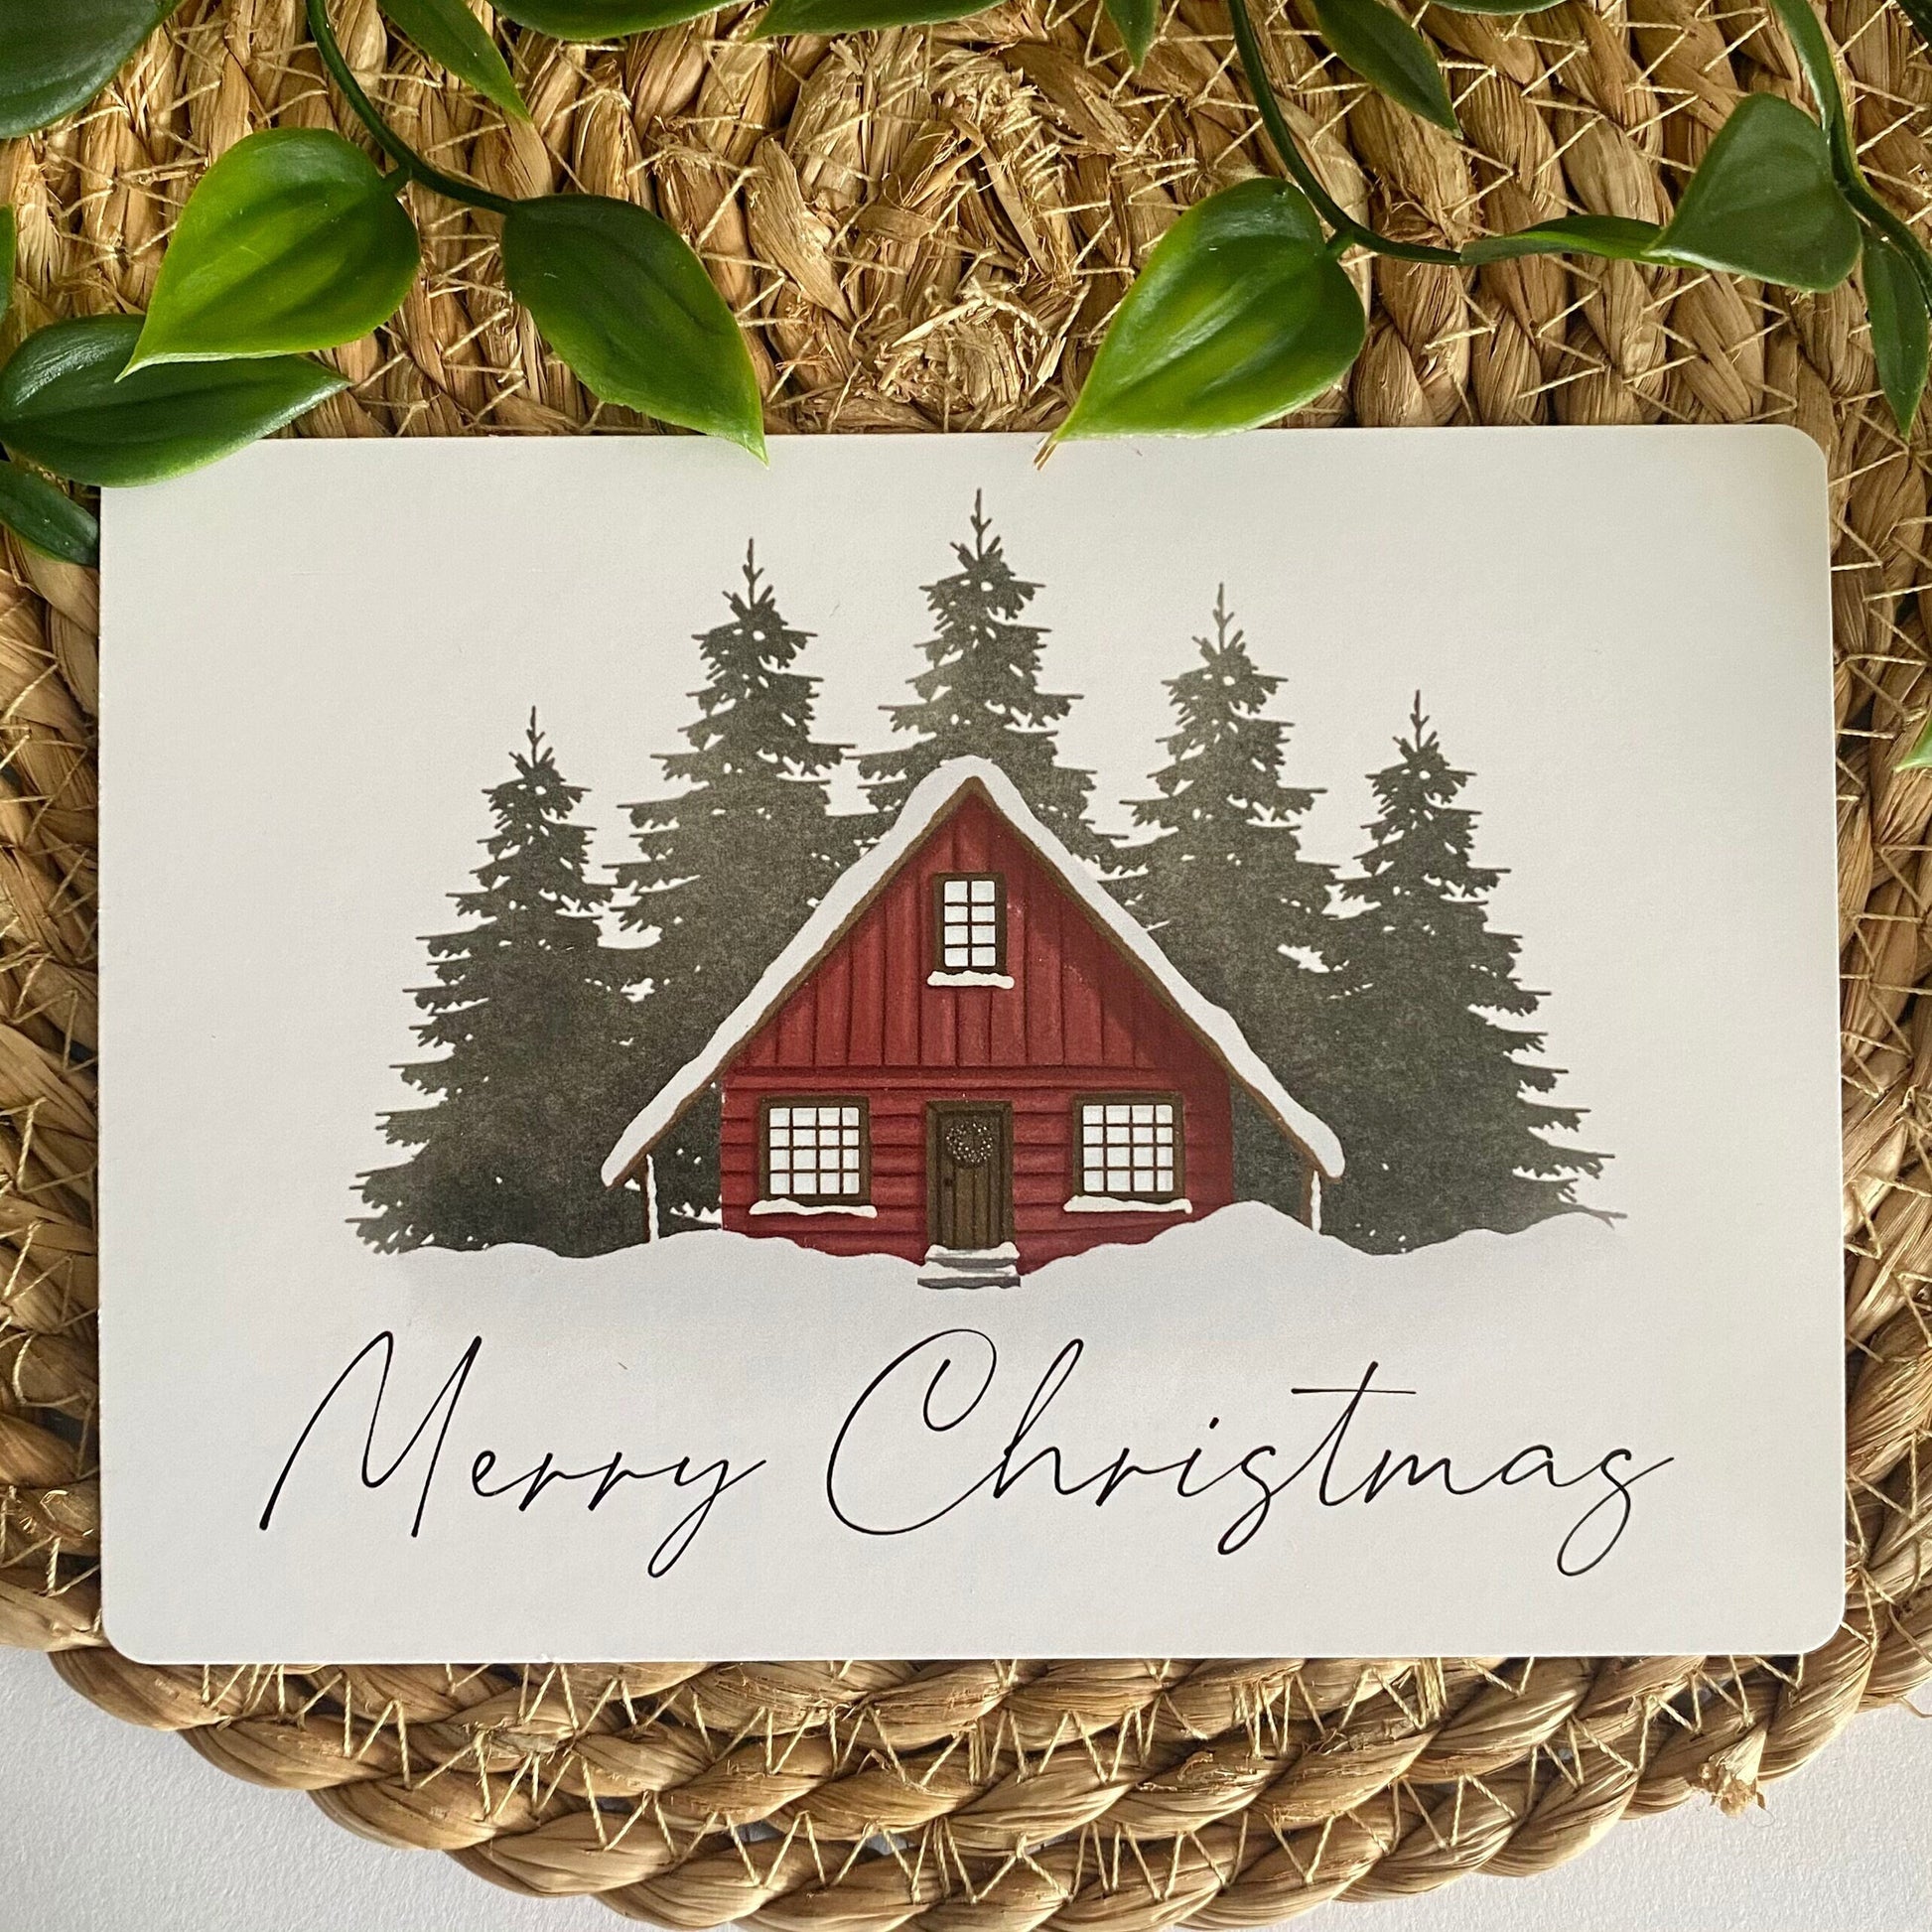 Merry Christmas Cabin in the snow - Christmas Postcard